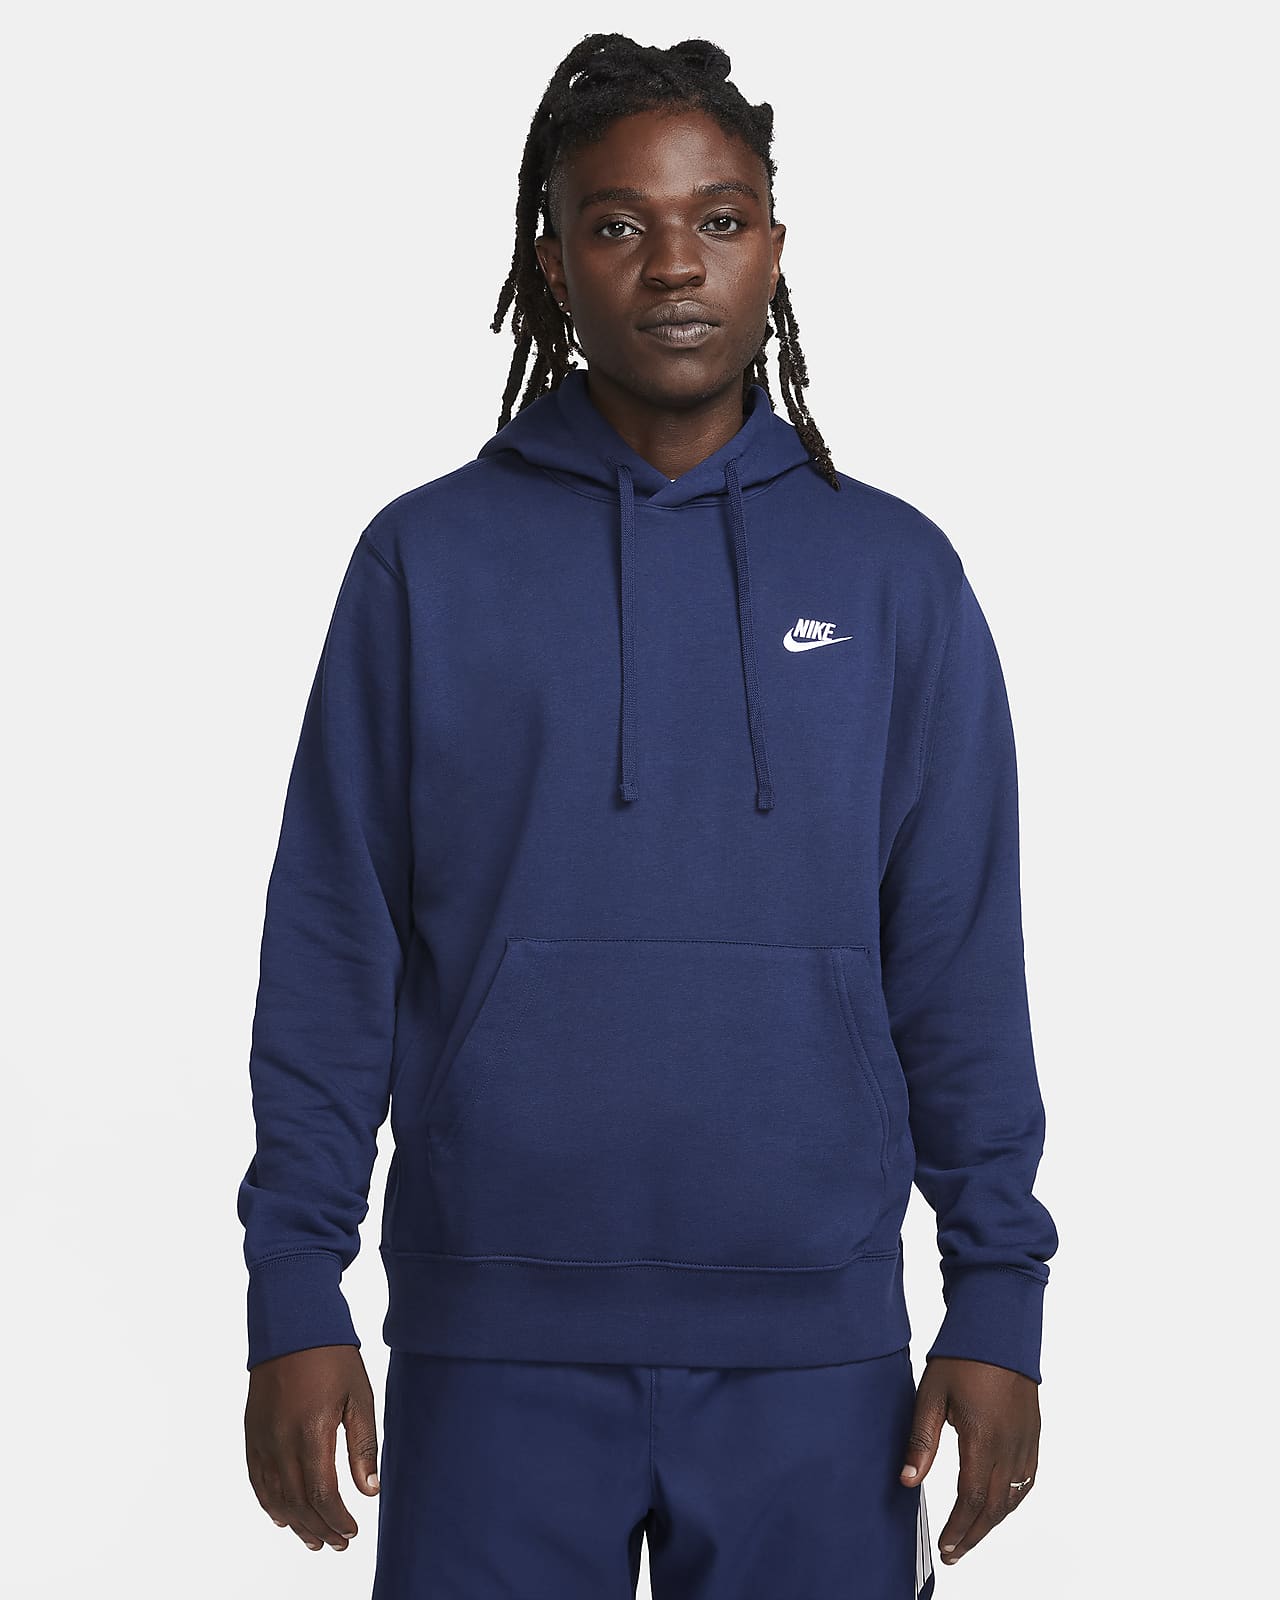 https://static.nike.com/a/images/t_PDP_1280_v1/f_auto,q_auto:eco/4a1390a8-bb4d-498a-972a-2c1e340fee54/sportswear-club-pullover-hoodie-SLCXWt.png